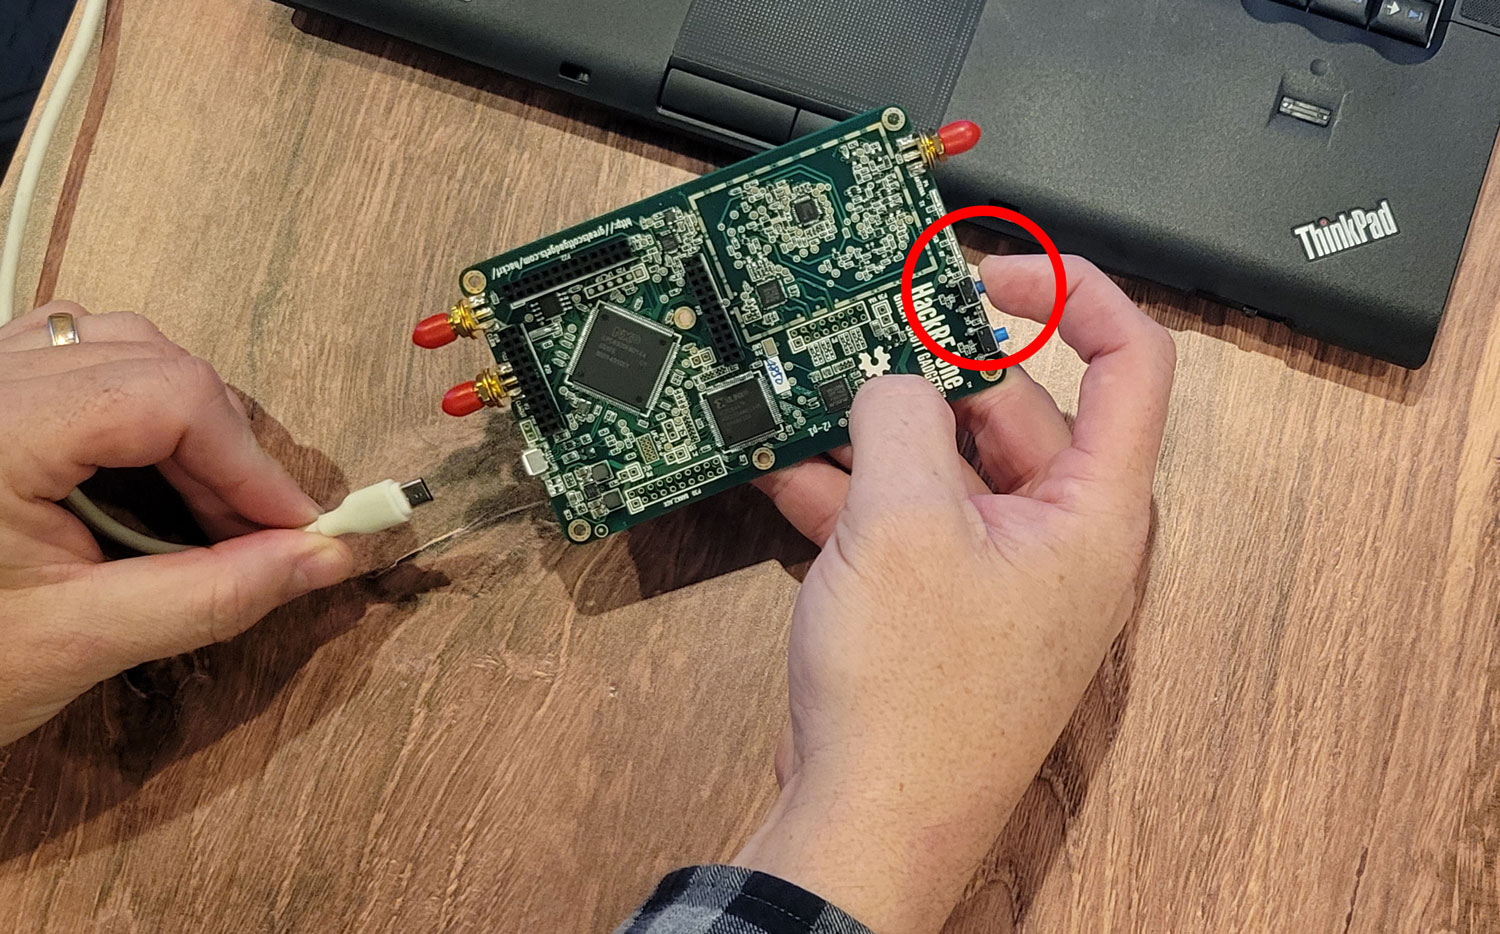 Boot up the HackRF One while pressing the DFU-Mode button